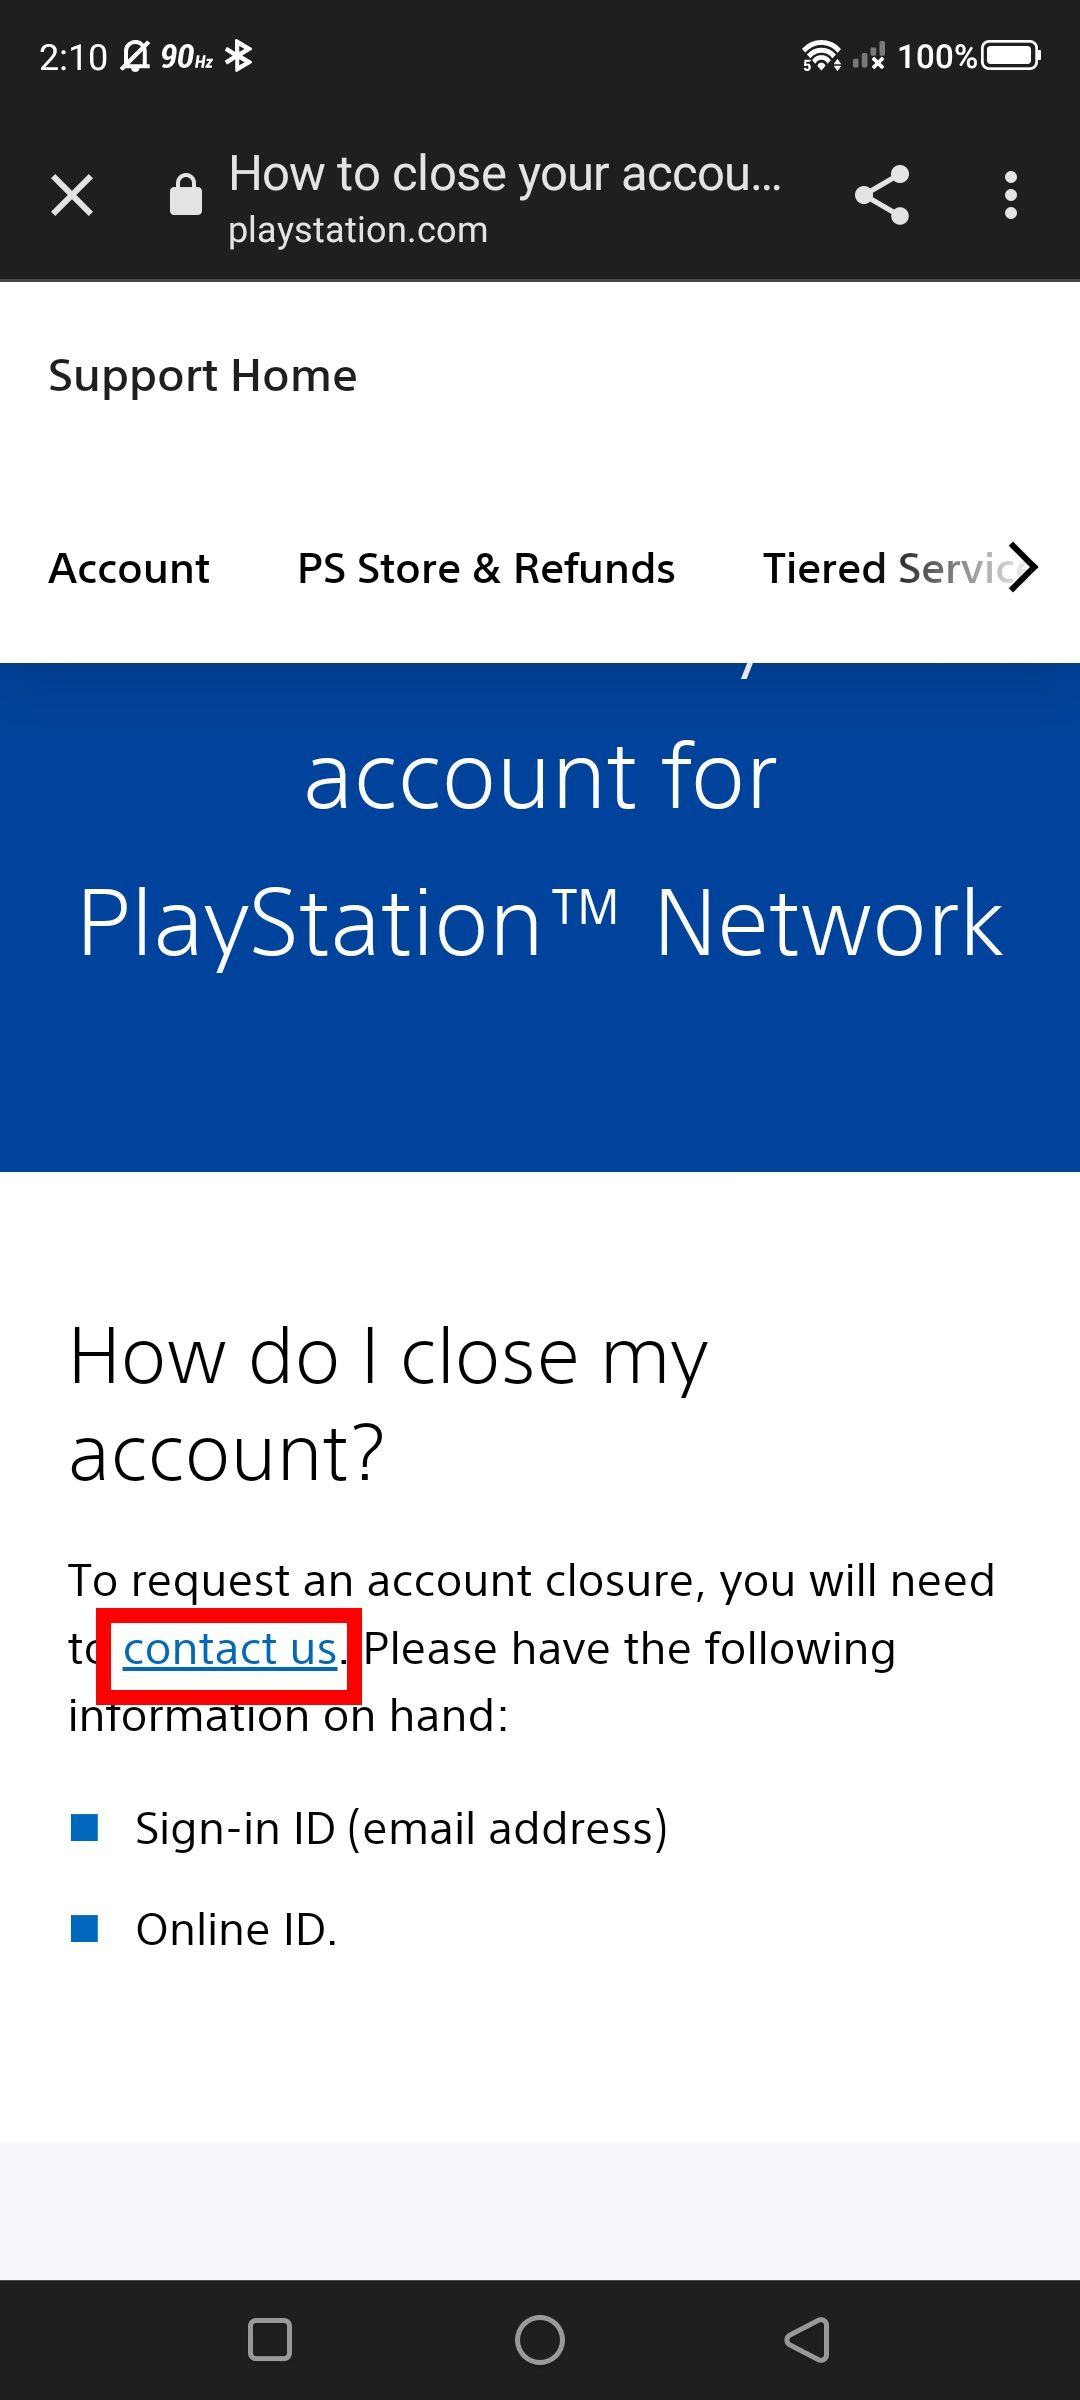 Red rectangle outline over the contact us hyperlink on the PlayStation Support page